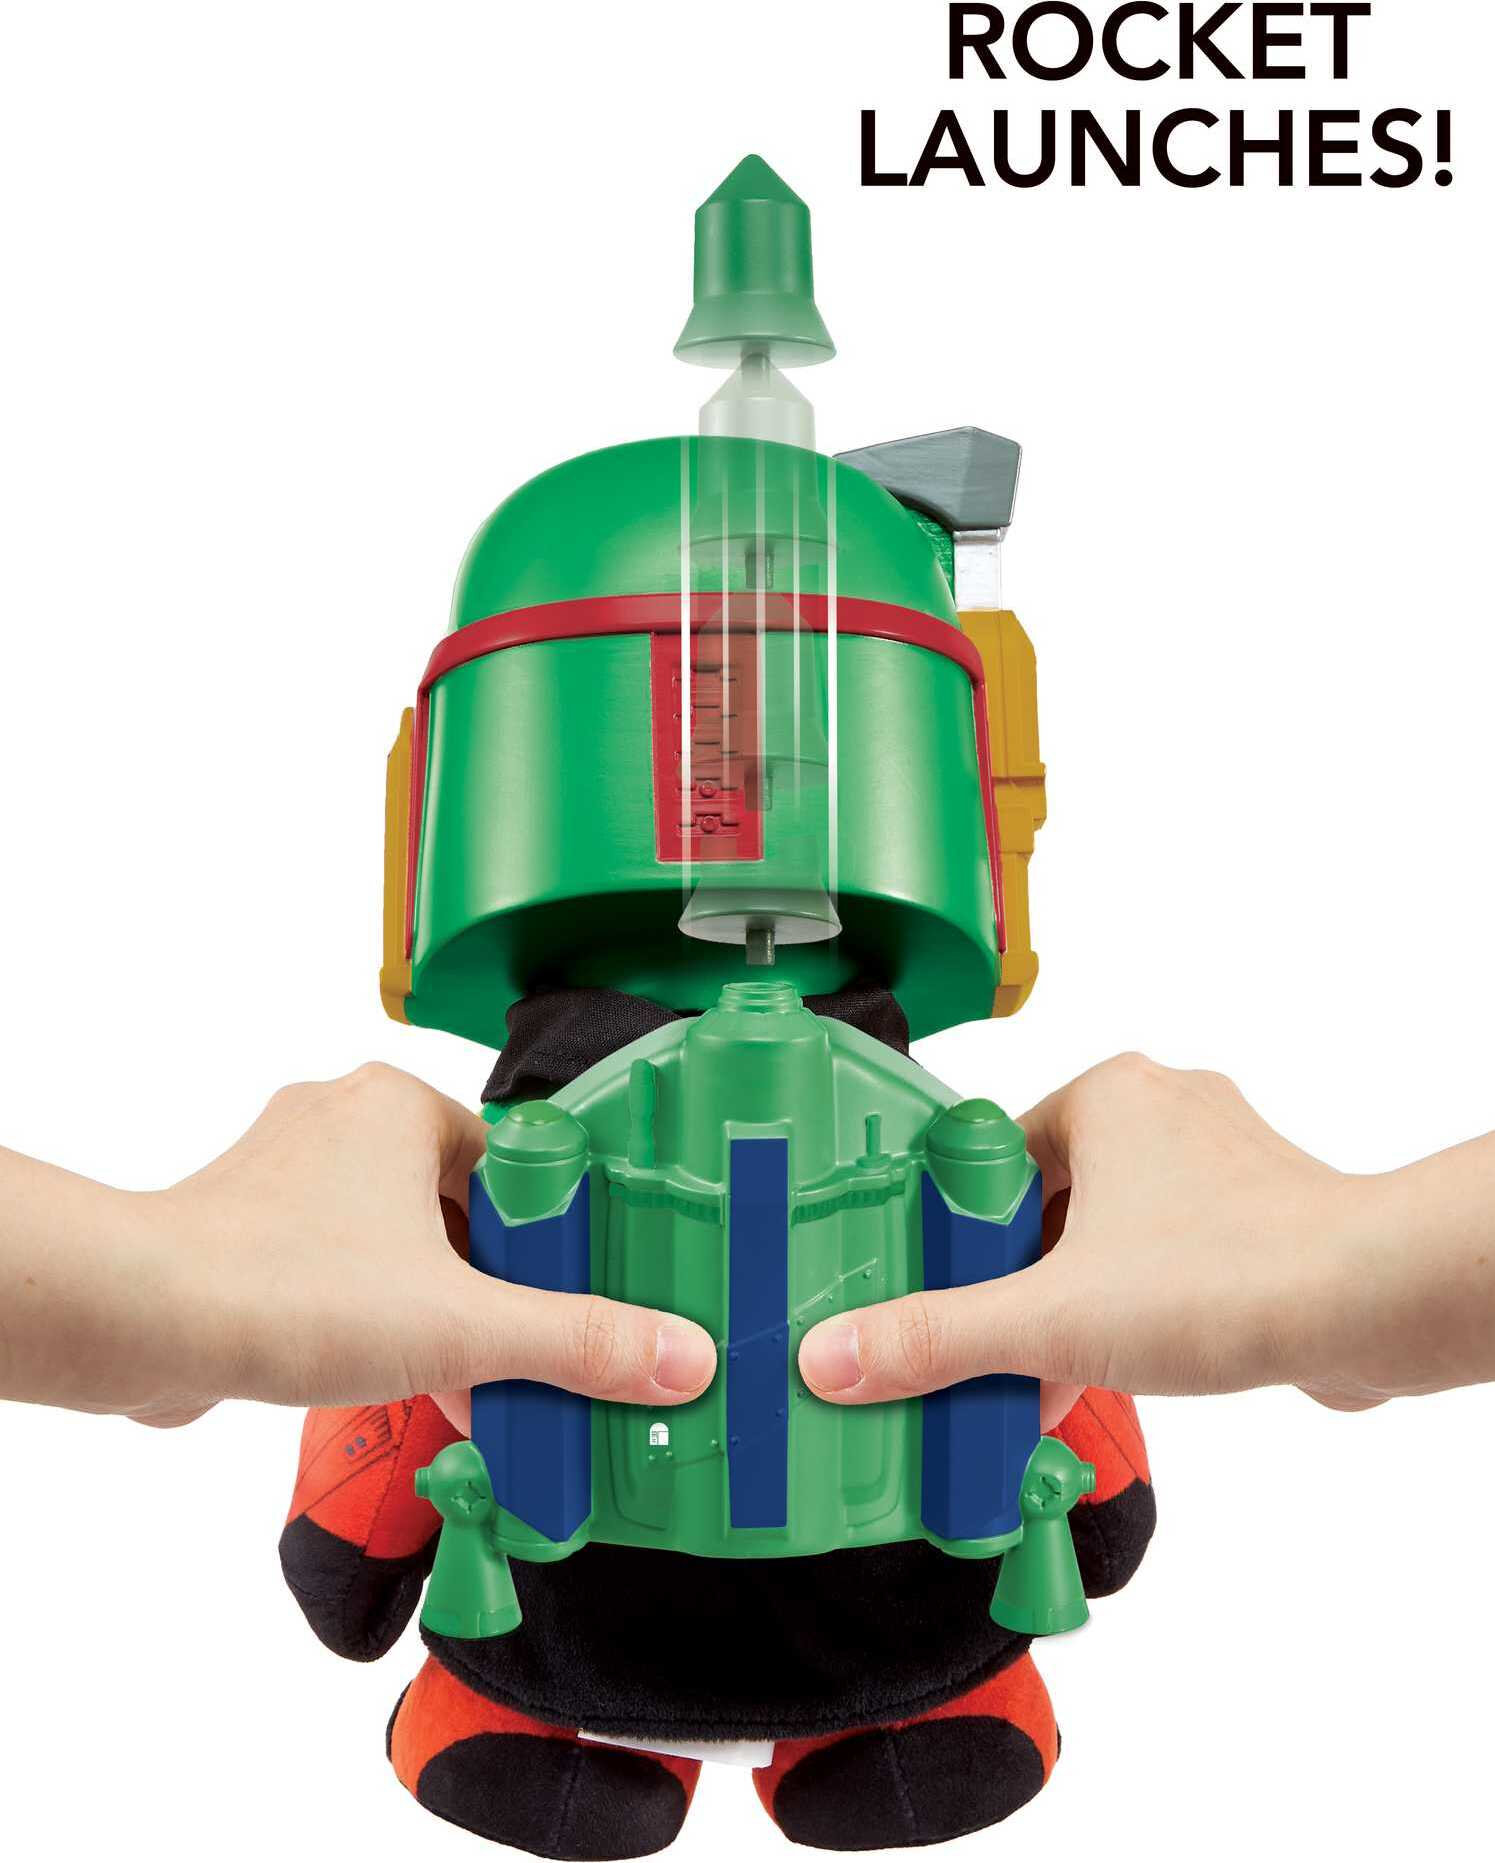 Star Wars Boba Fett Voice Cloner 12" Feature Plush with Air-Powered Soft Rocket Launcher - image 4 of 6